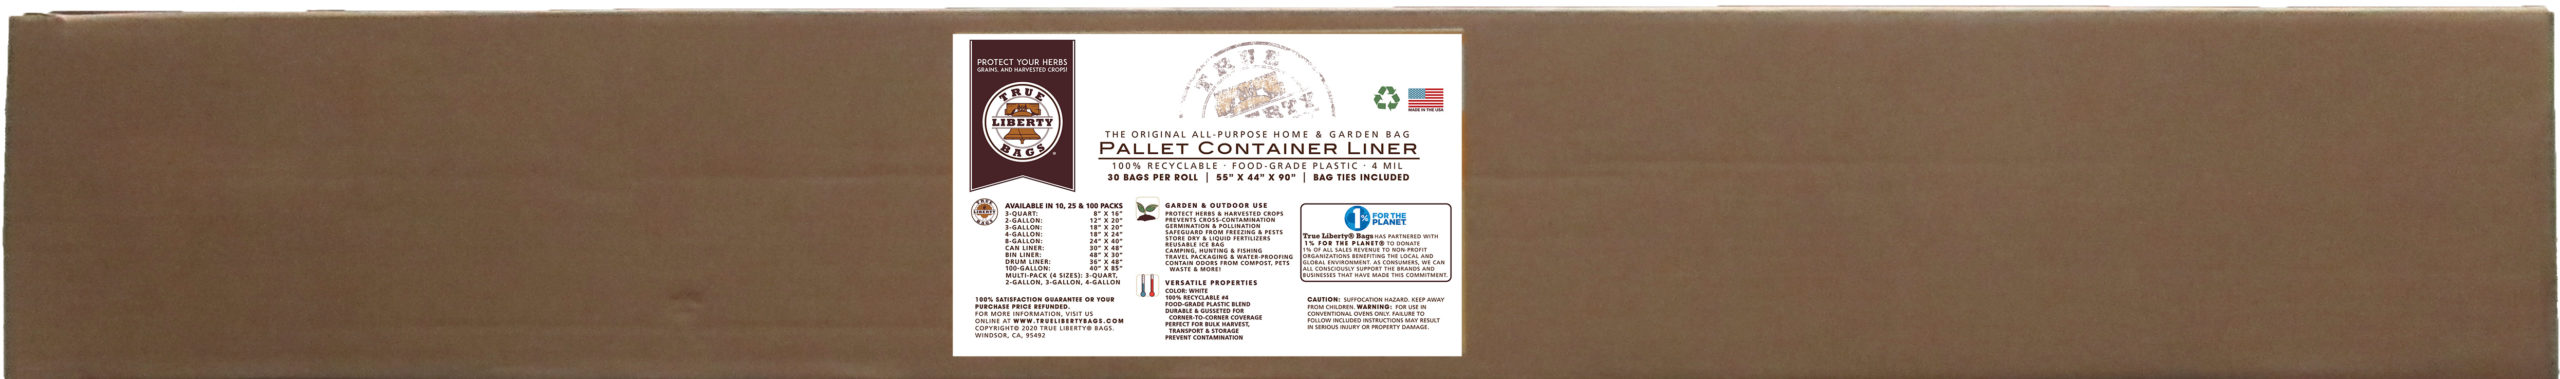 True Liberty Pallet Container Liner 55" x 44" x 90", 30 Bags/Roll, White TLBPL30